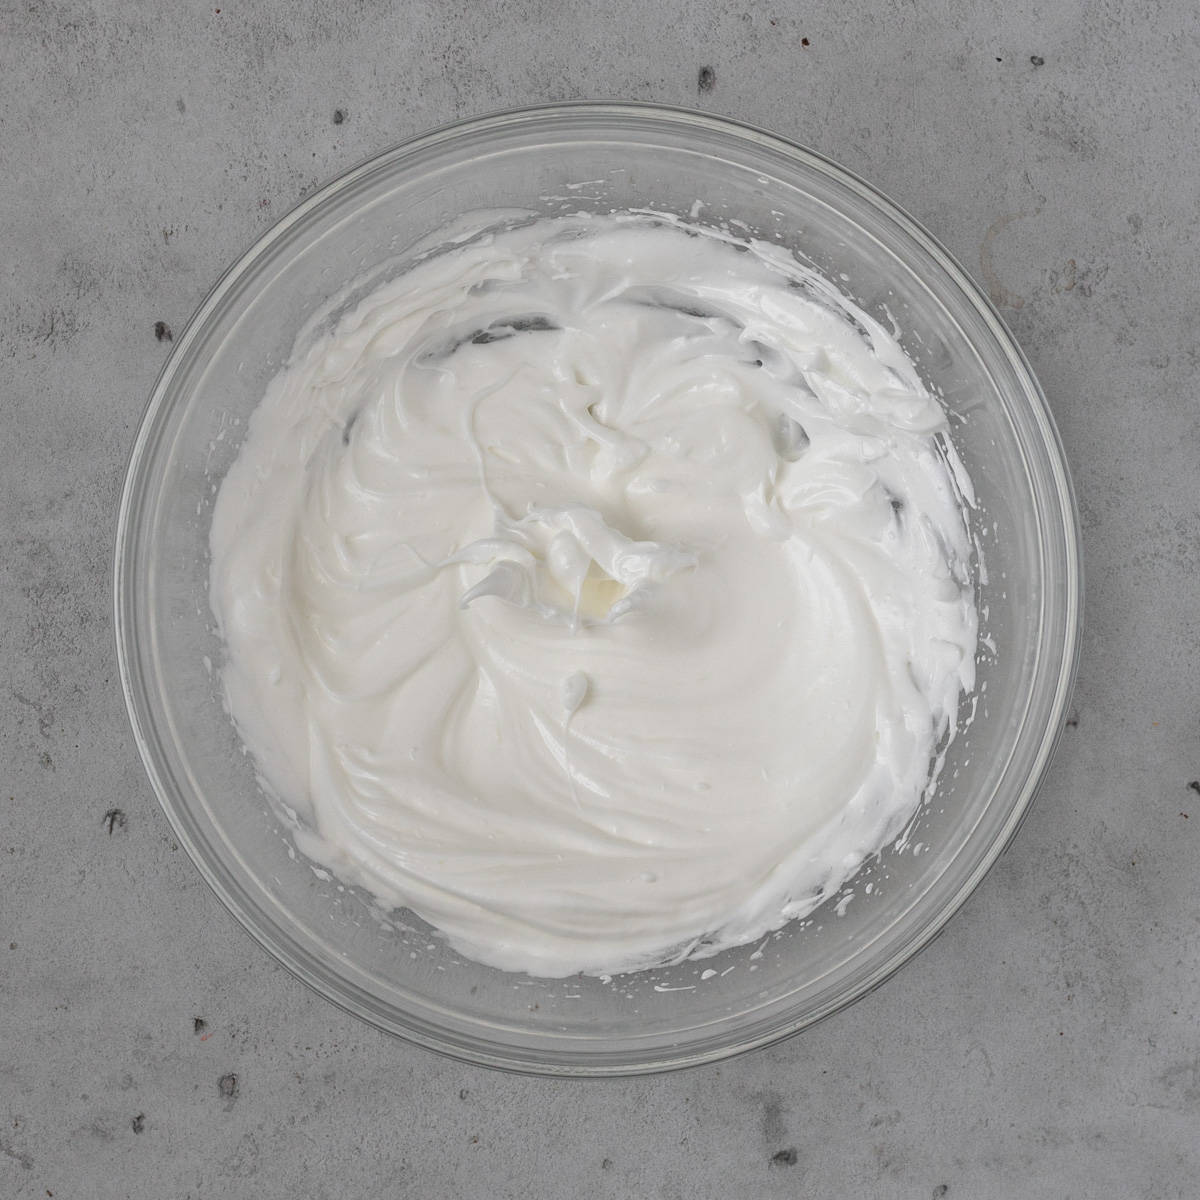 the french meringue in a glass bowl on a grey background.